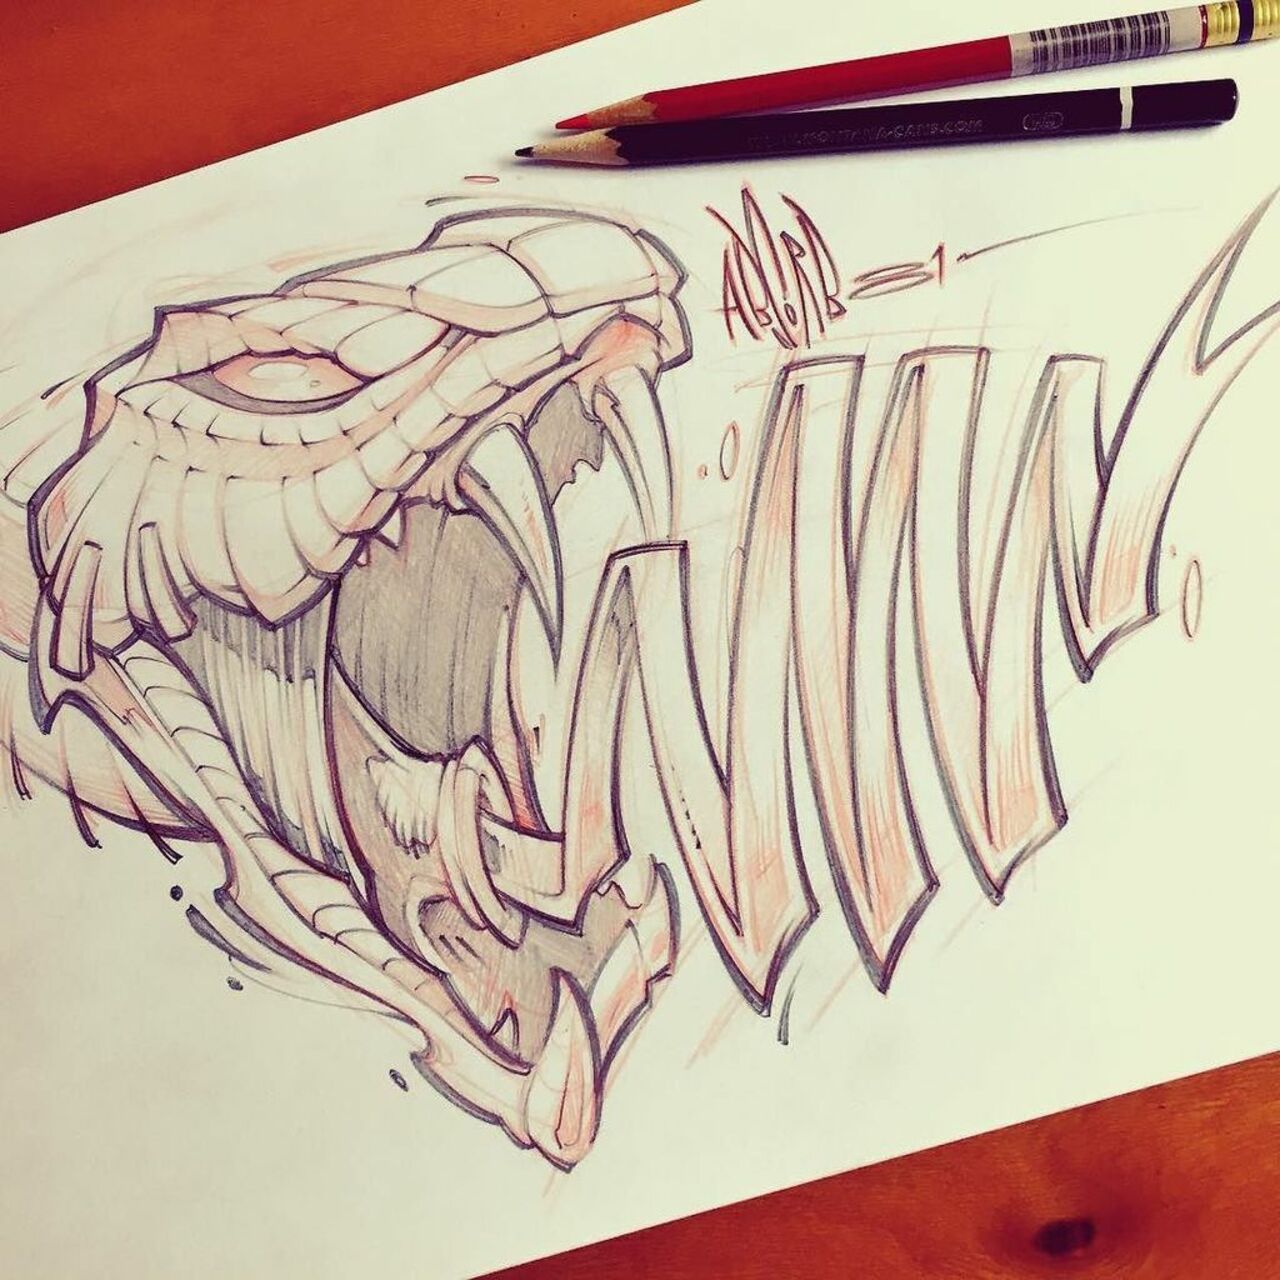 Quick lunch sketch! #snake #graffiti #graphic #art #absorb81 #viper #prismacolor #pencil #… http://ift.tt/23cPYfA https://t.co/oMMwkO6T7M